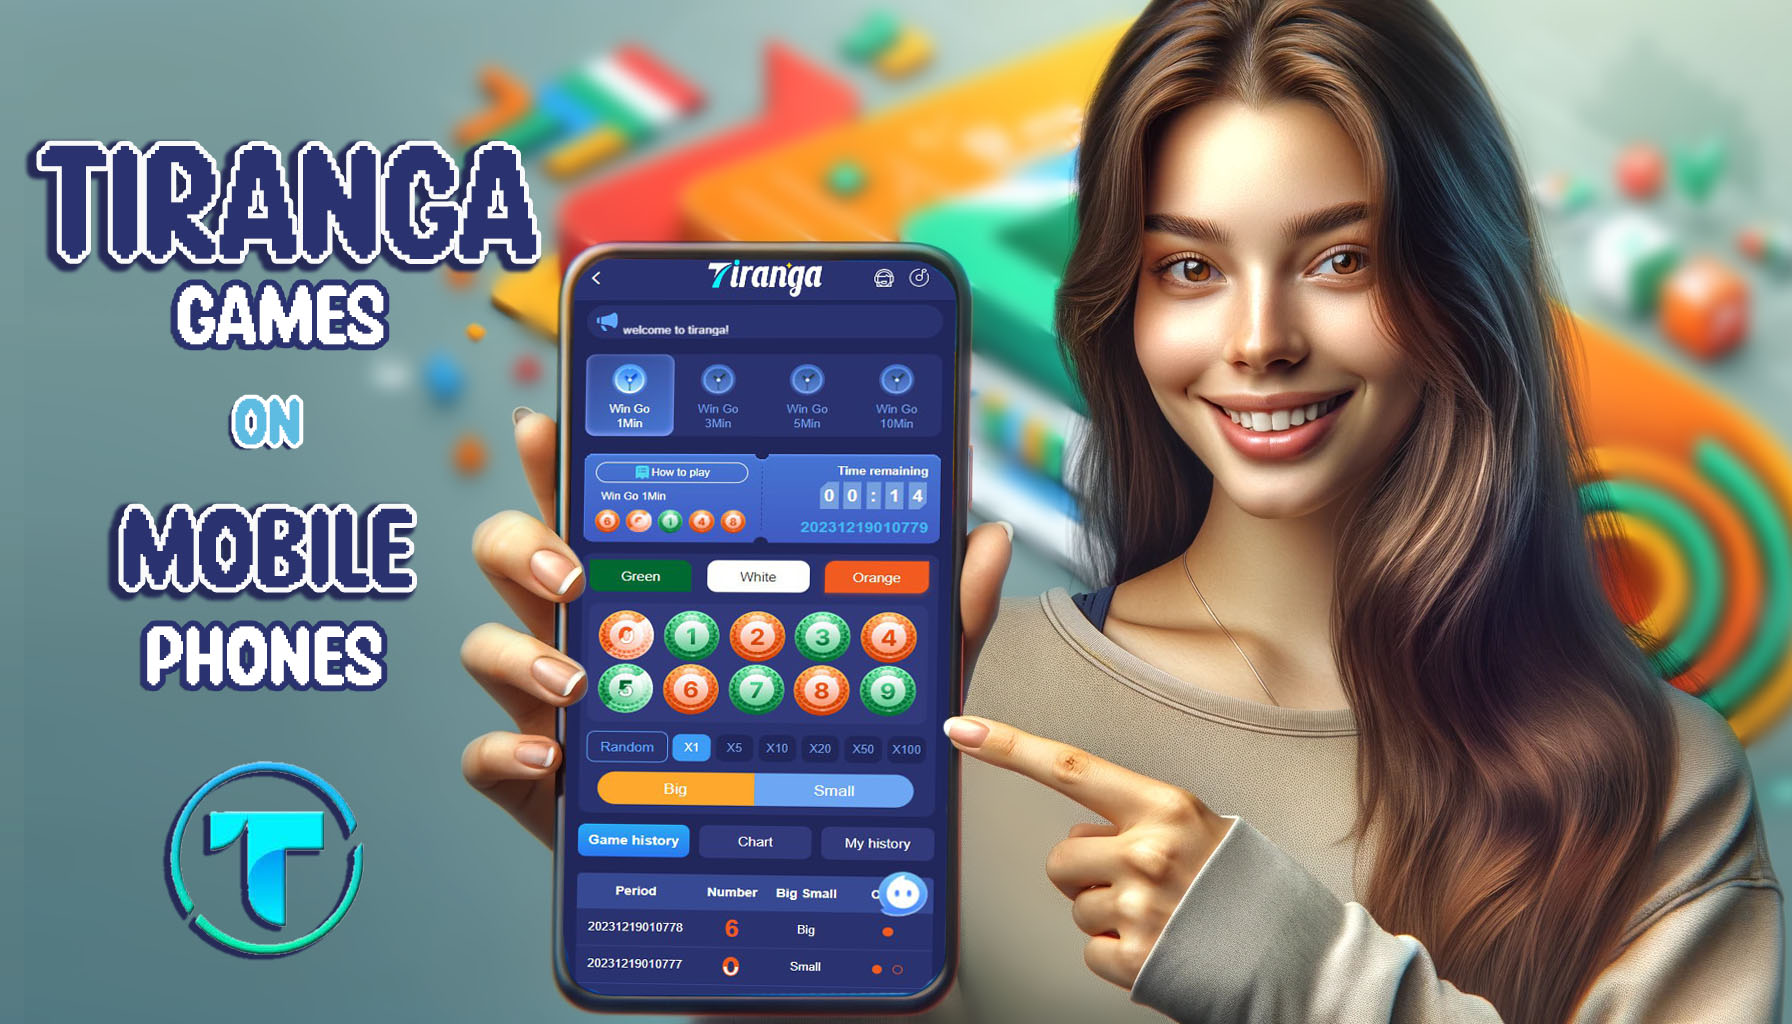 an image of a woman showing the mobile interface of tiranga games on mobile